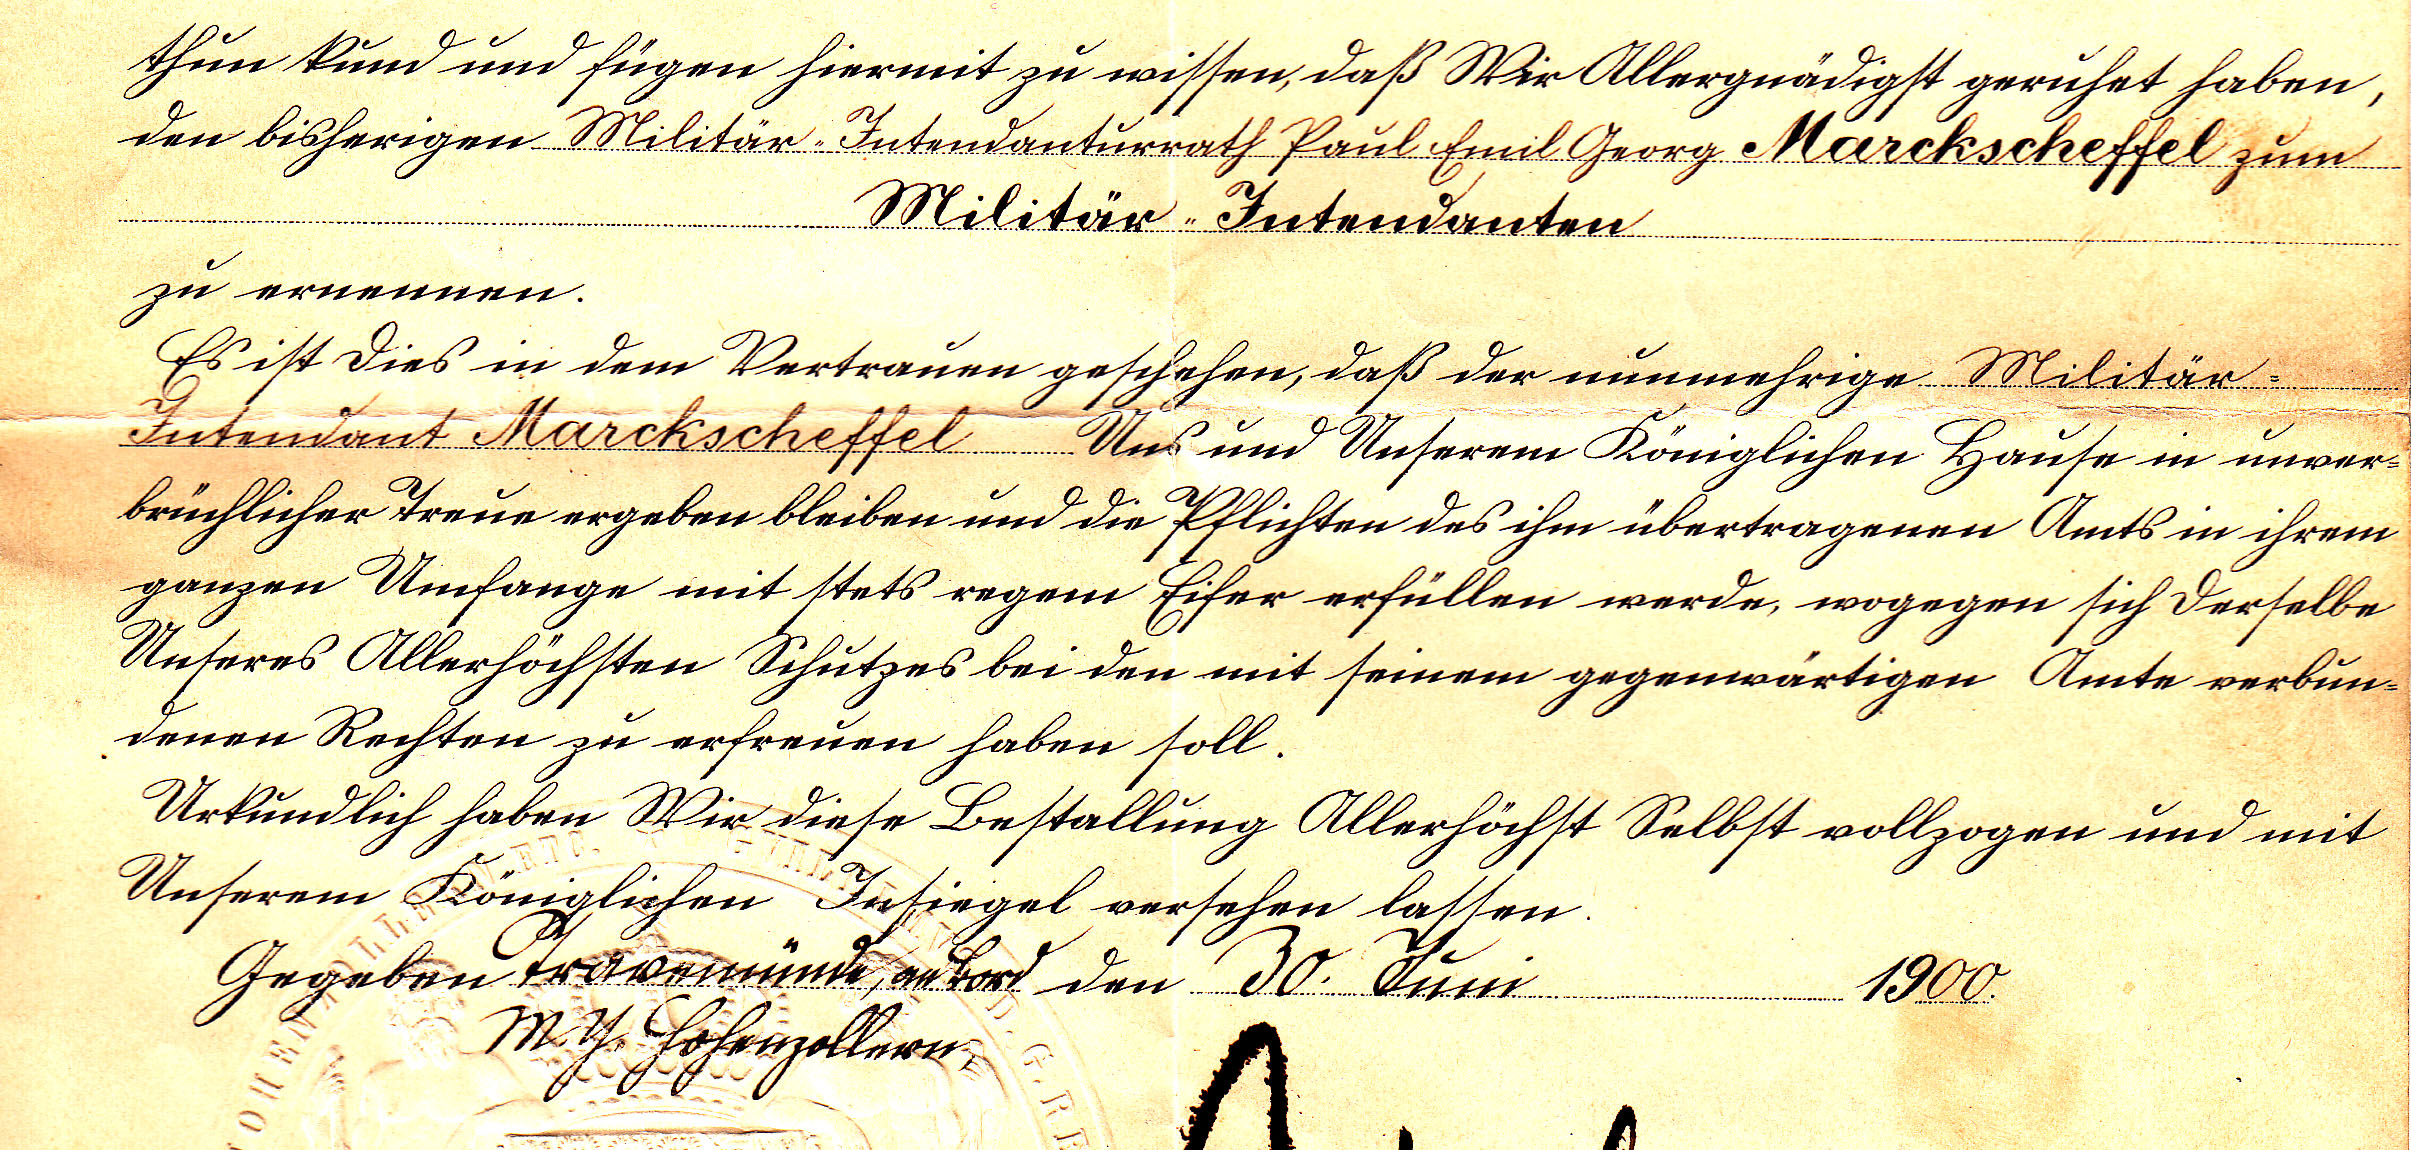 Imperial Promotion document with Kaiser Wilhelm II Signature